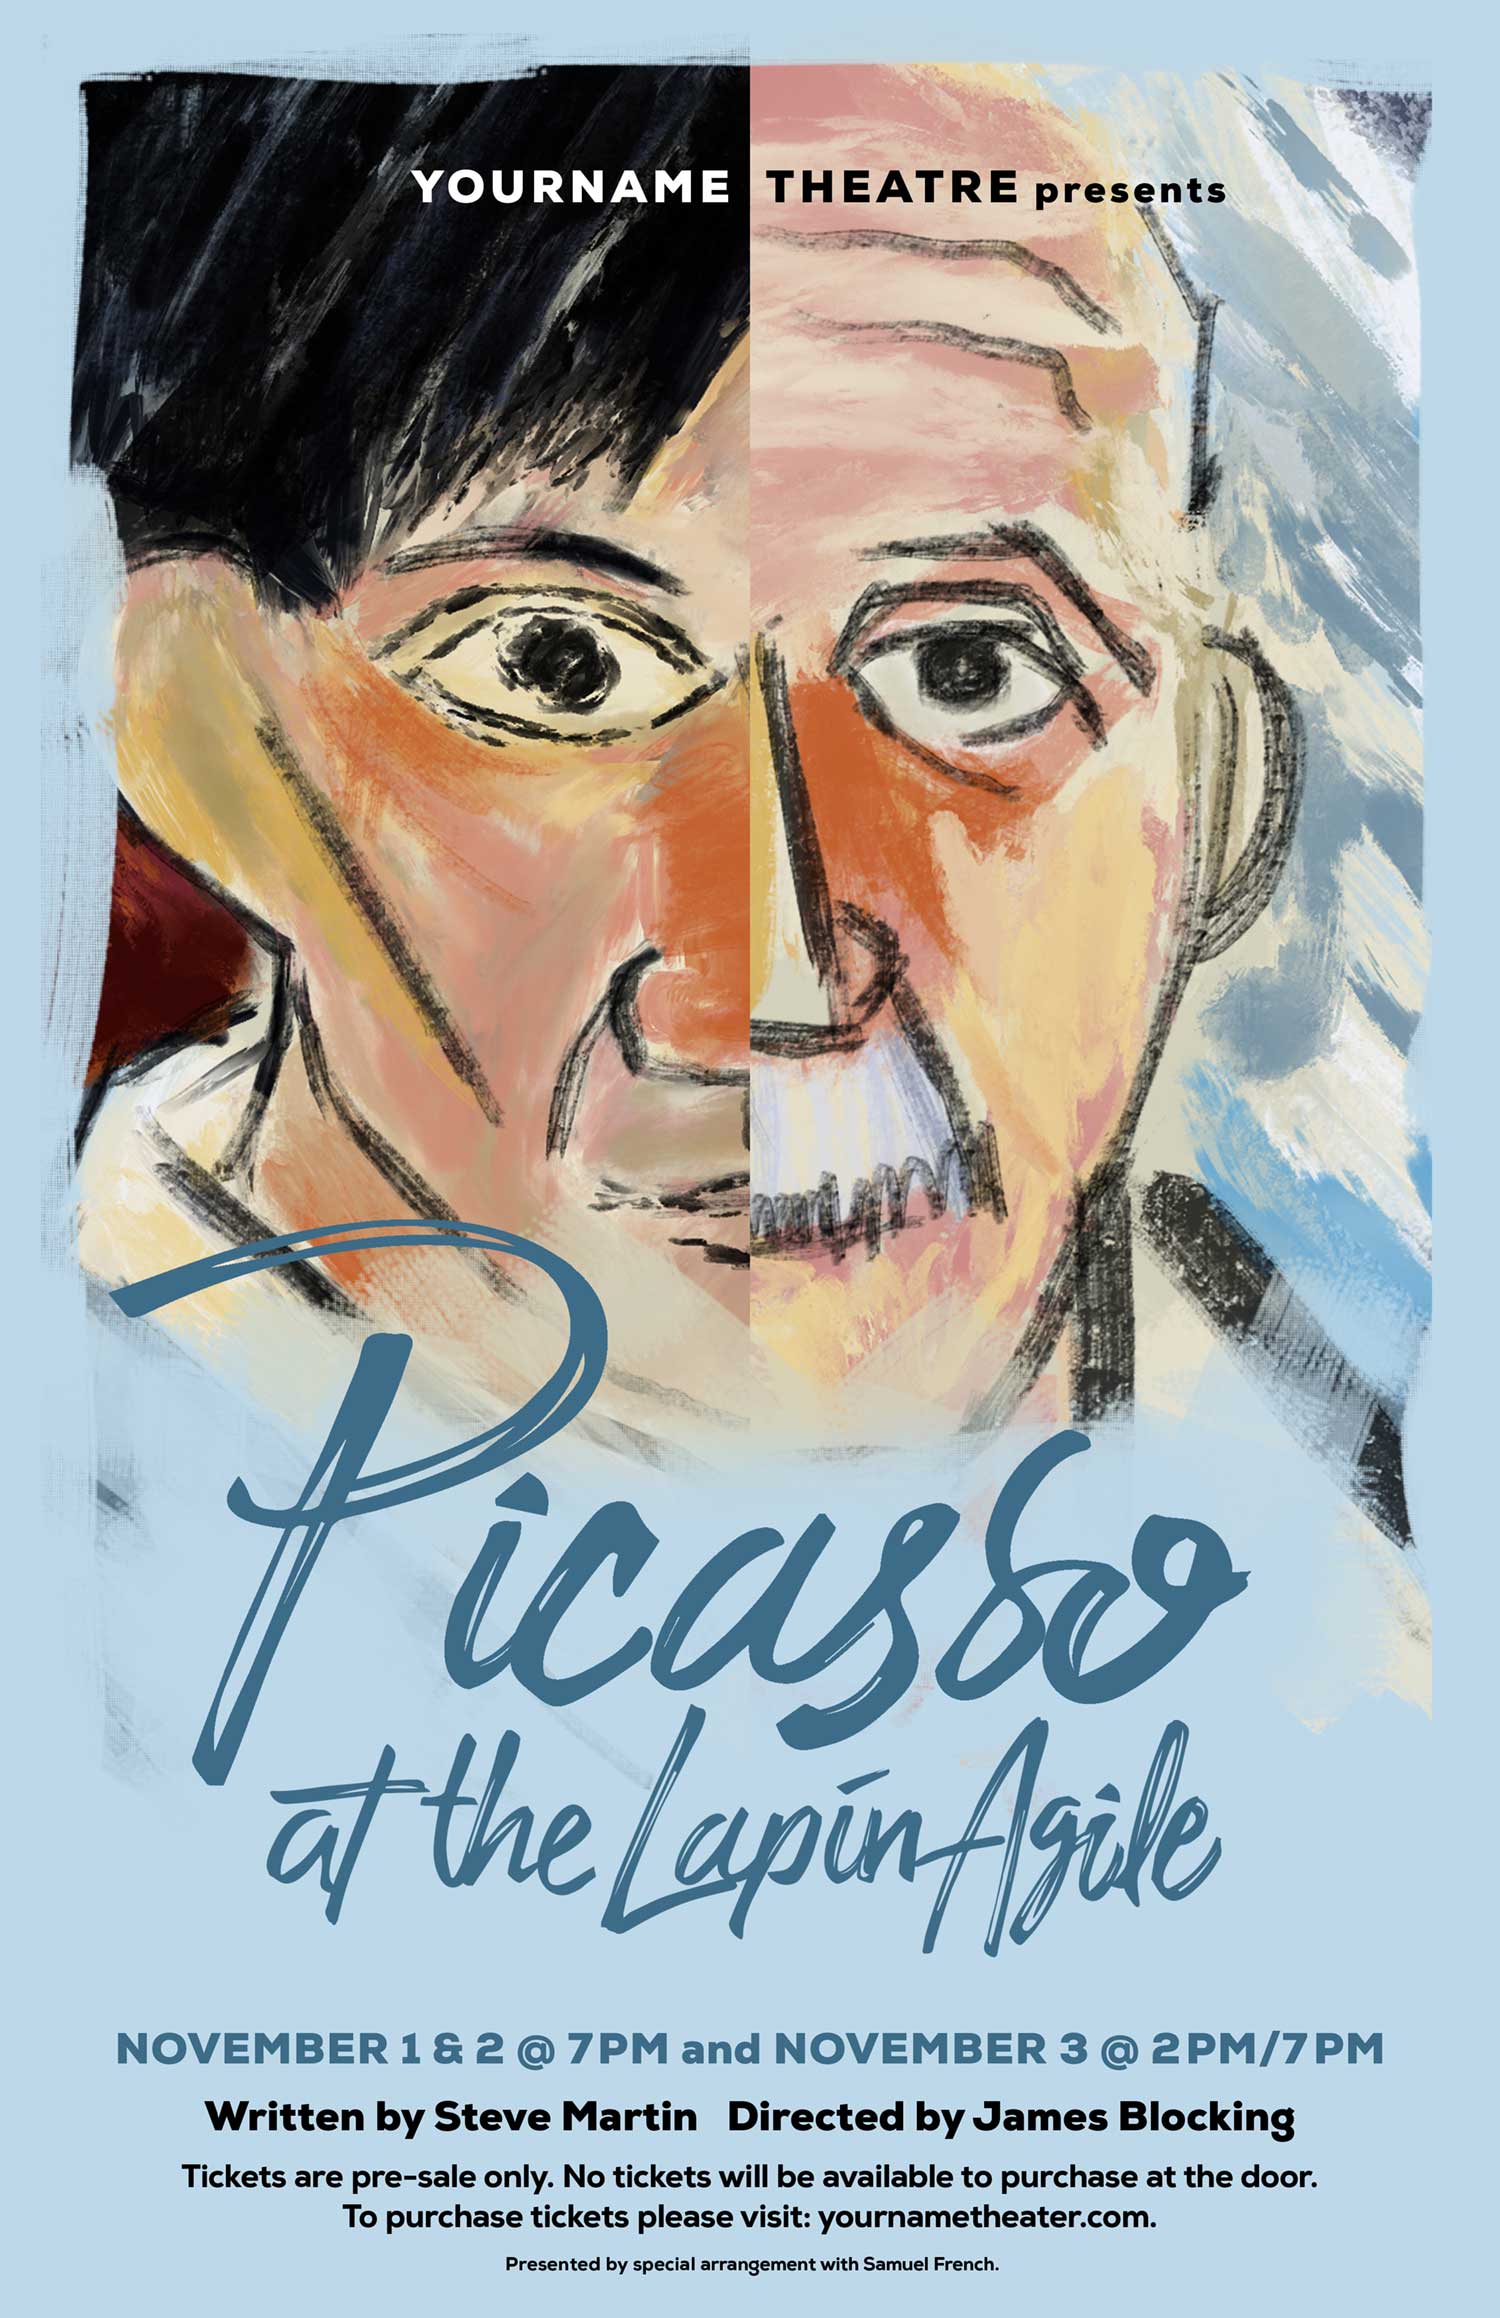 Drama-Queen-Graphics-Picasso at Lapin Agile-Theater Branding.jpg.jpg